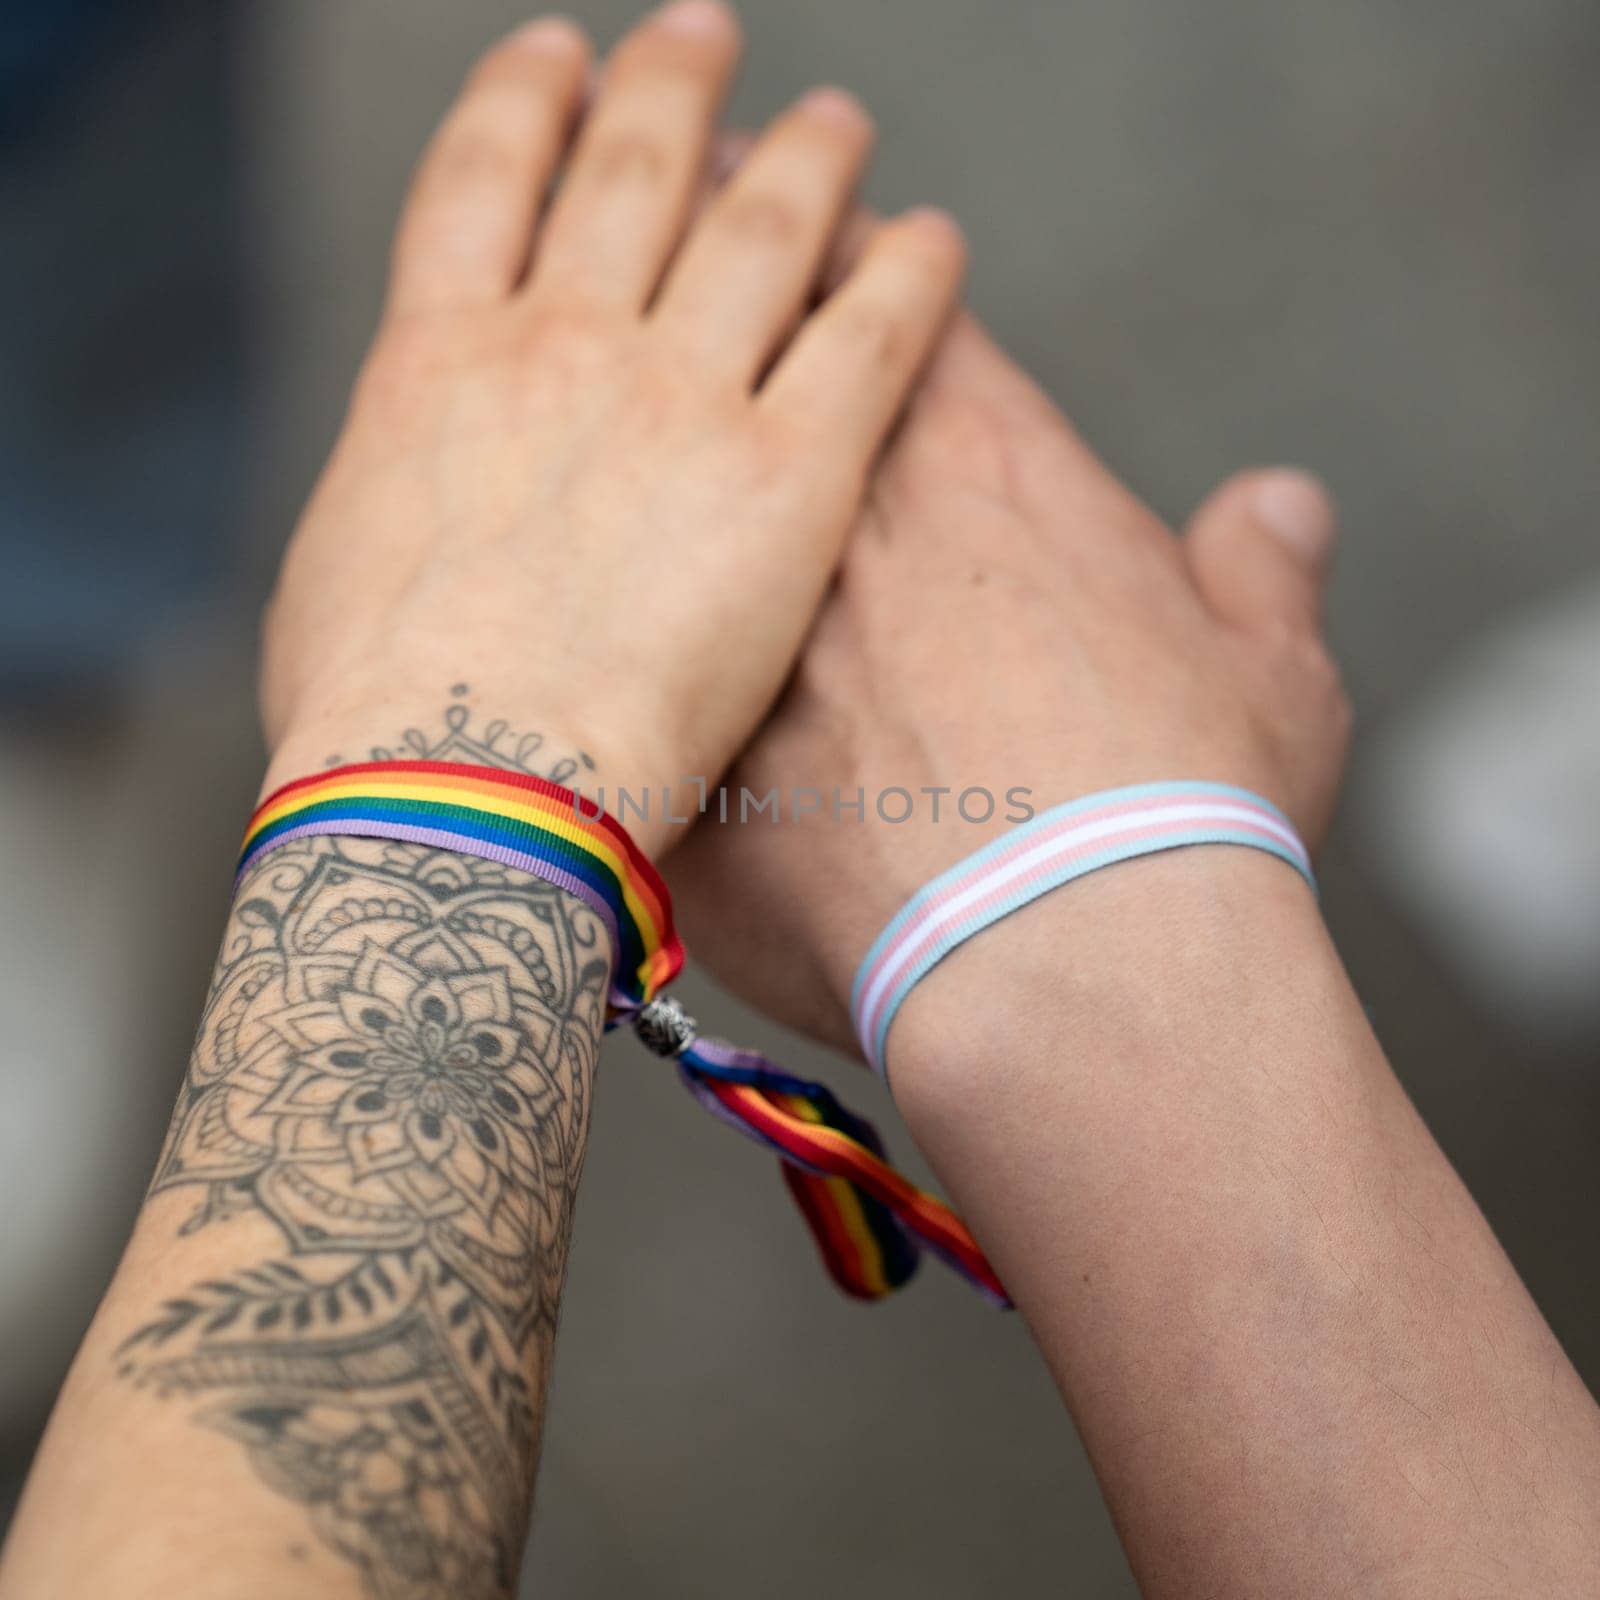 Hands of lesbian women with a ribbon of LGBT rainbow colors tied together. LGBT pride concept, lgbt rights campaign by papatonic